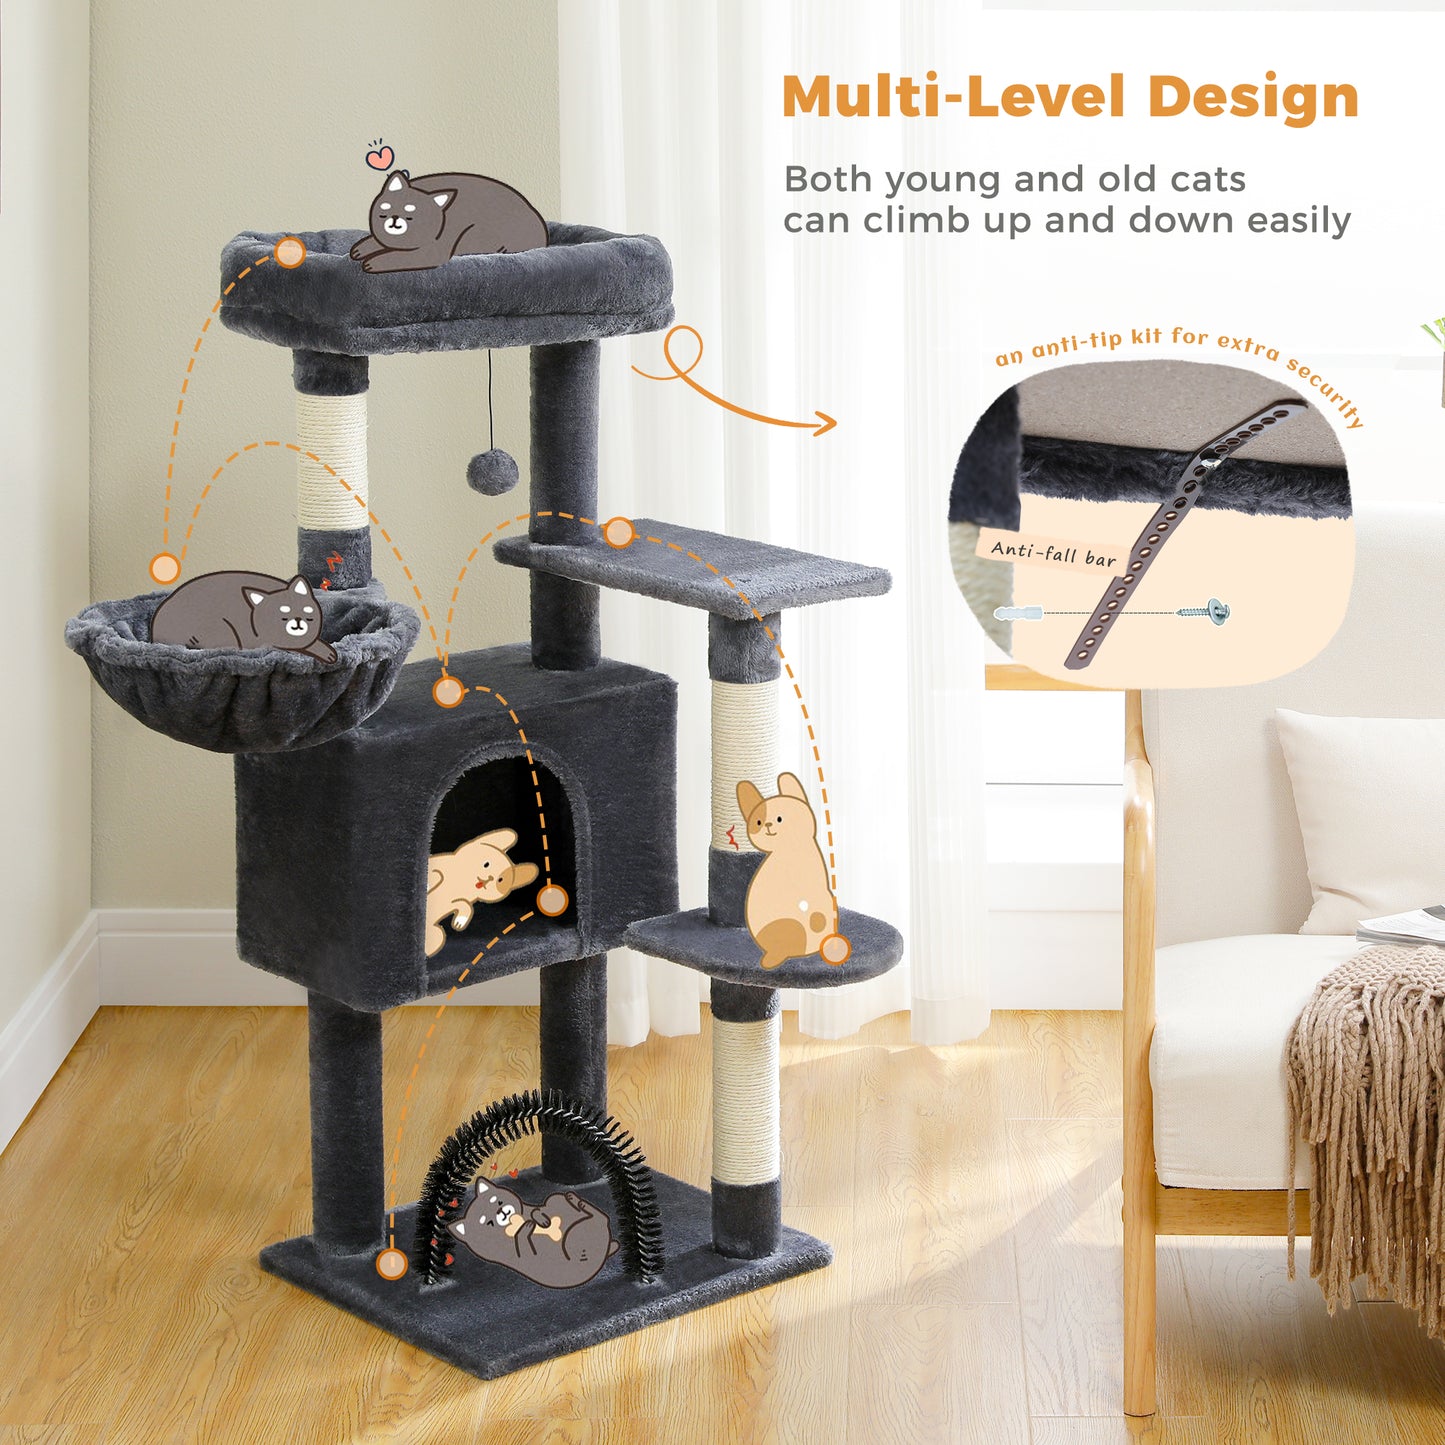 PAWZ Road Cat Tree Tower Scratching Post Scratcher with Self-Grooming Toy 106cm Dark Grey